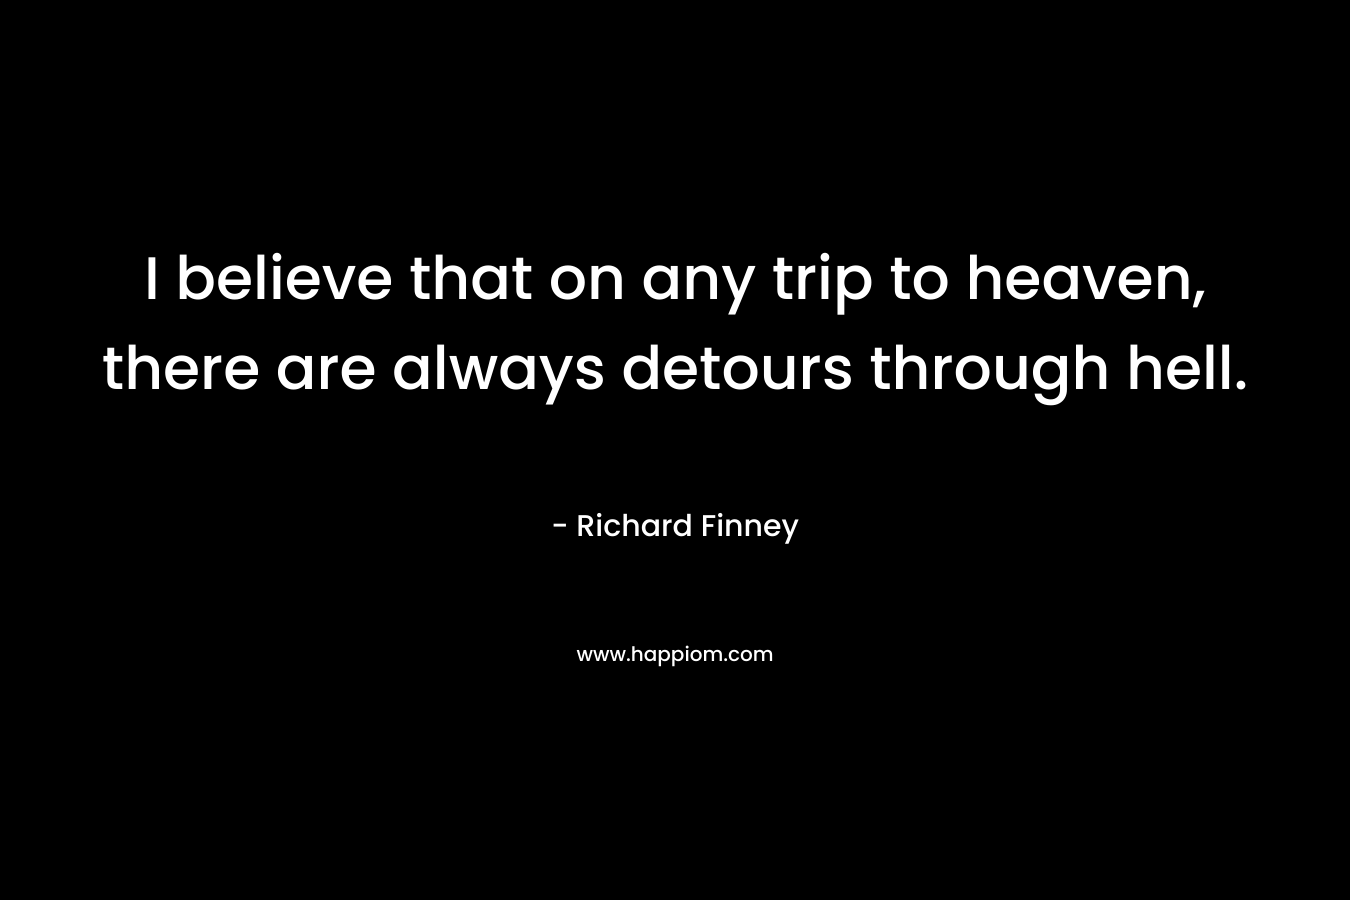 I believe that on any trip to heaven, there are always detours through hell. – Richard Finney